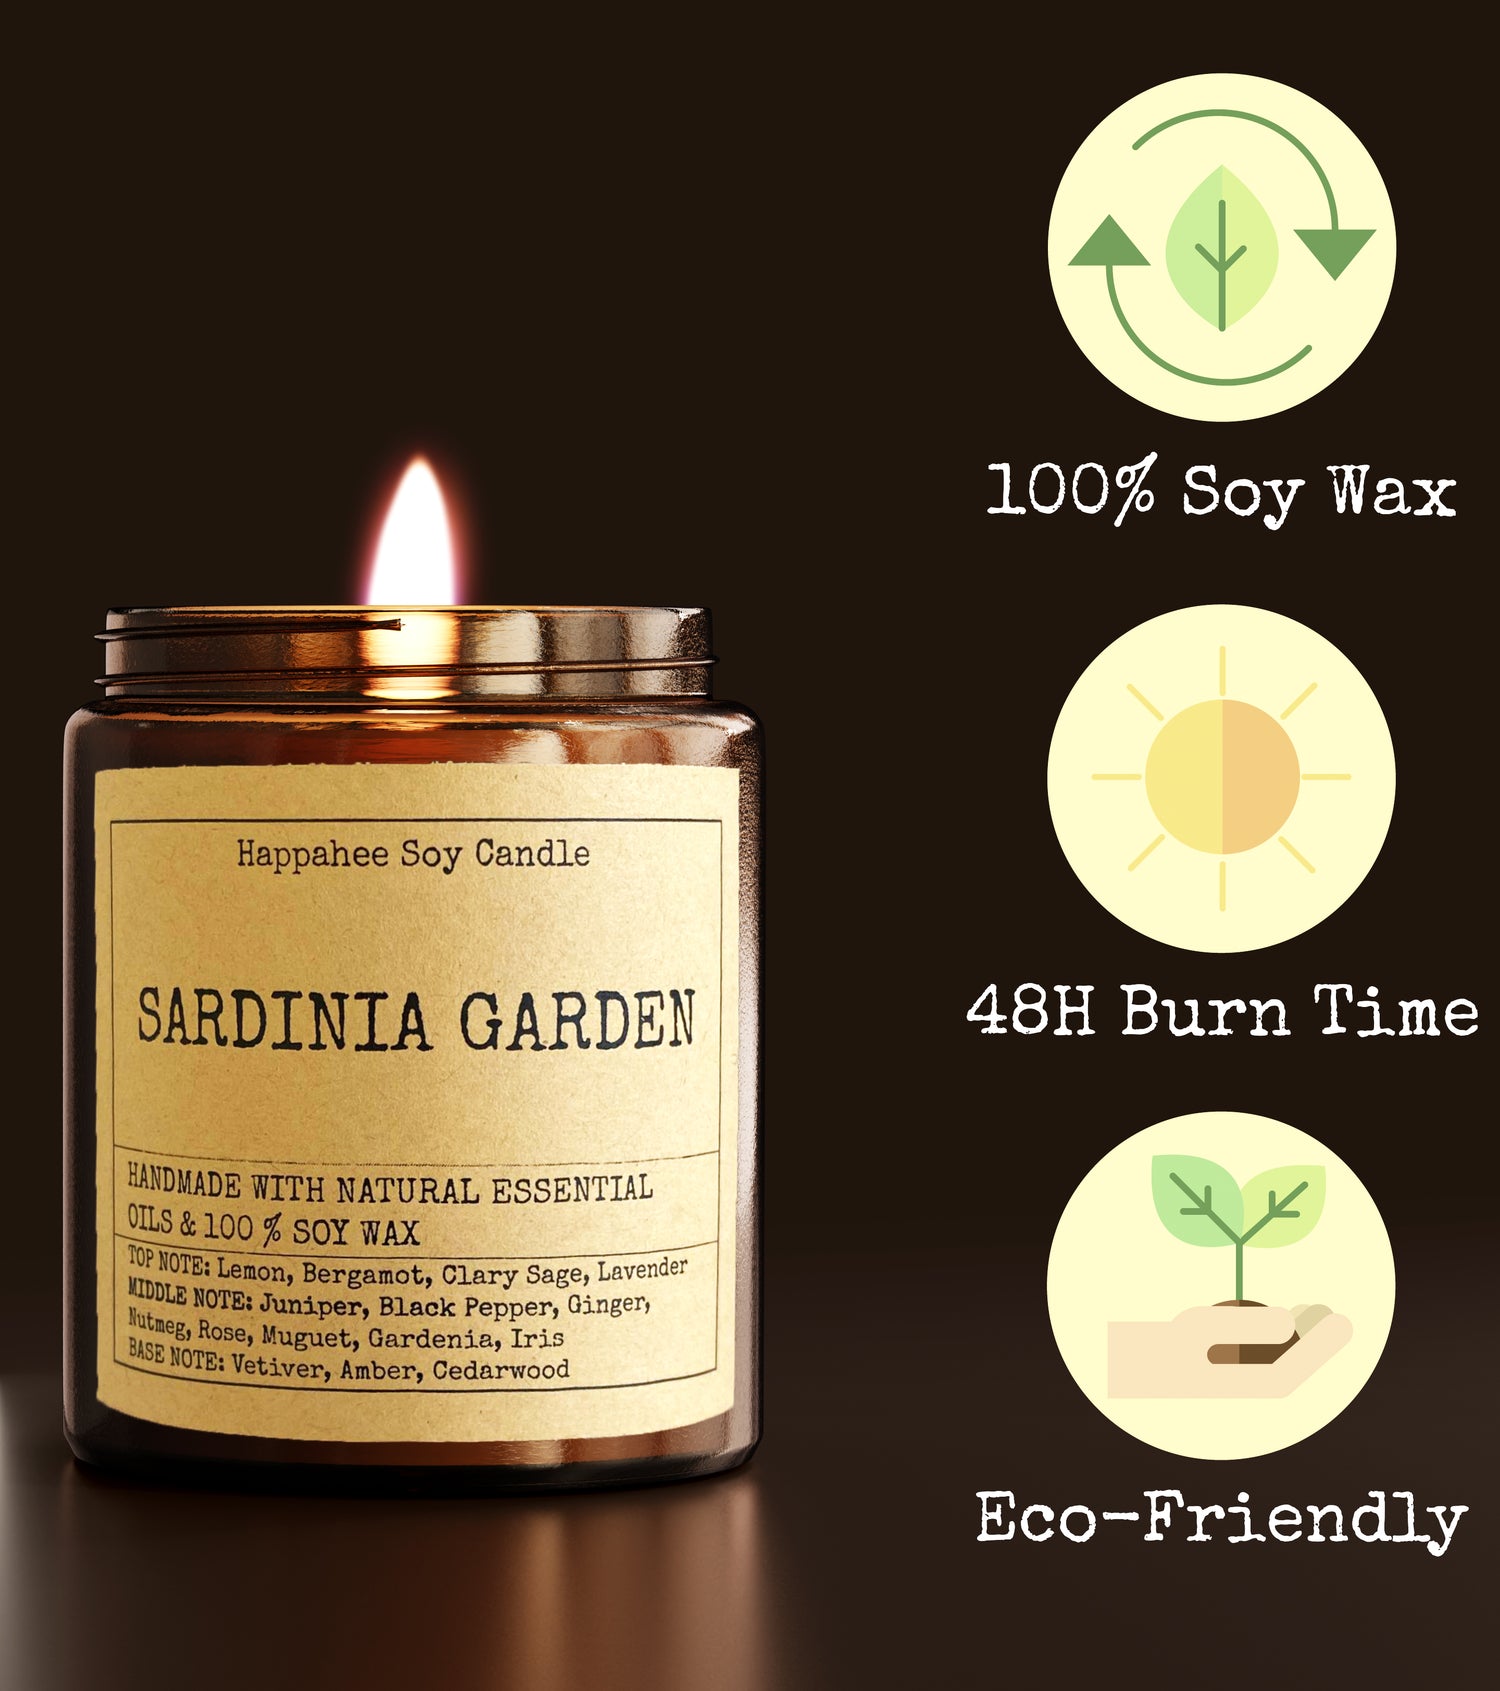 Happahee Soy Candle in Amber Jar Glass - 100% Natural and Eco-Friendly with up to 48 Hours Burn Time.